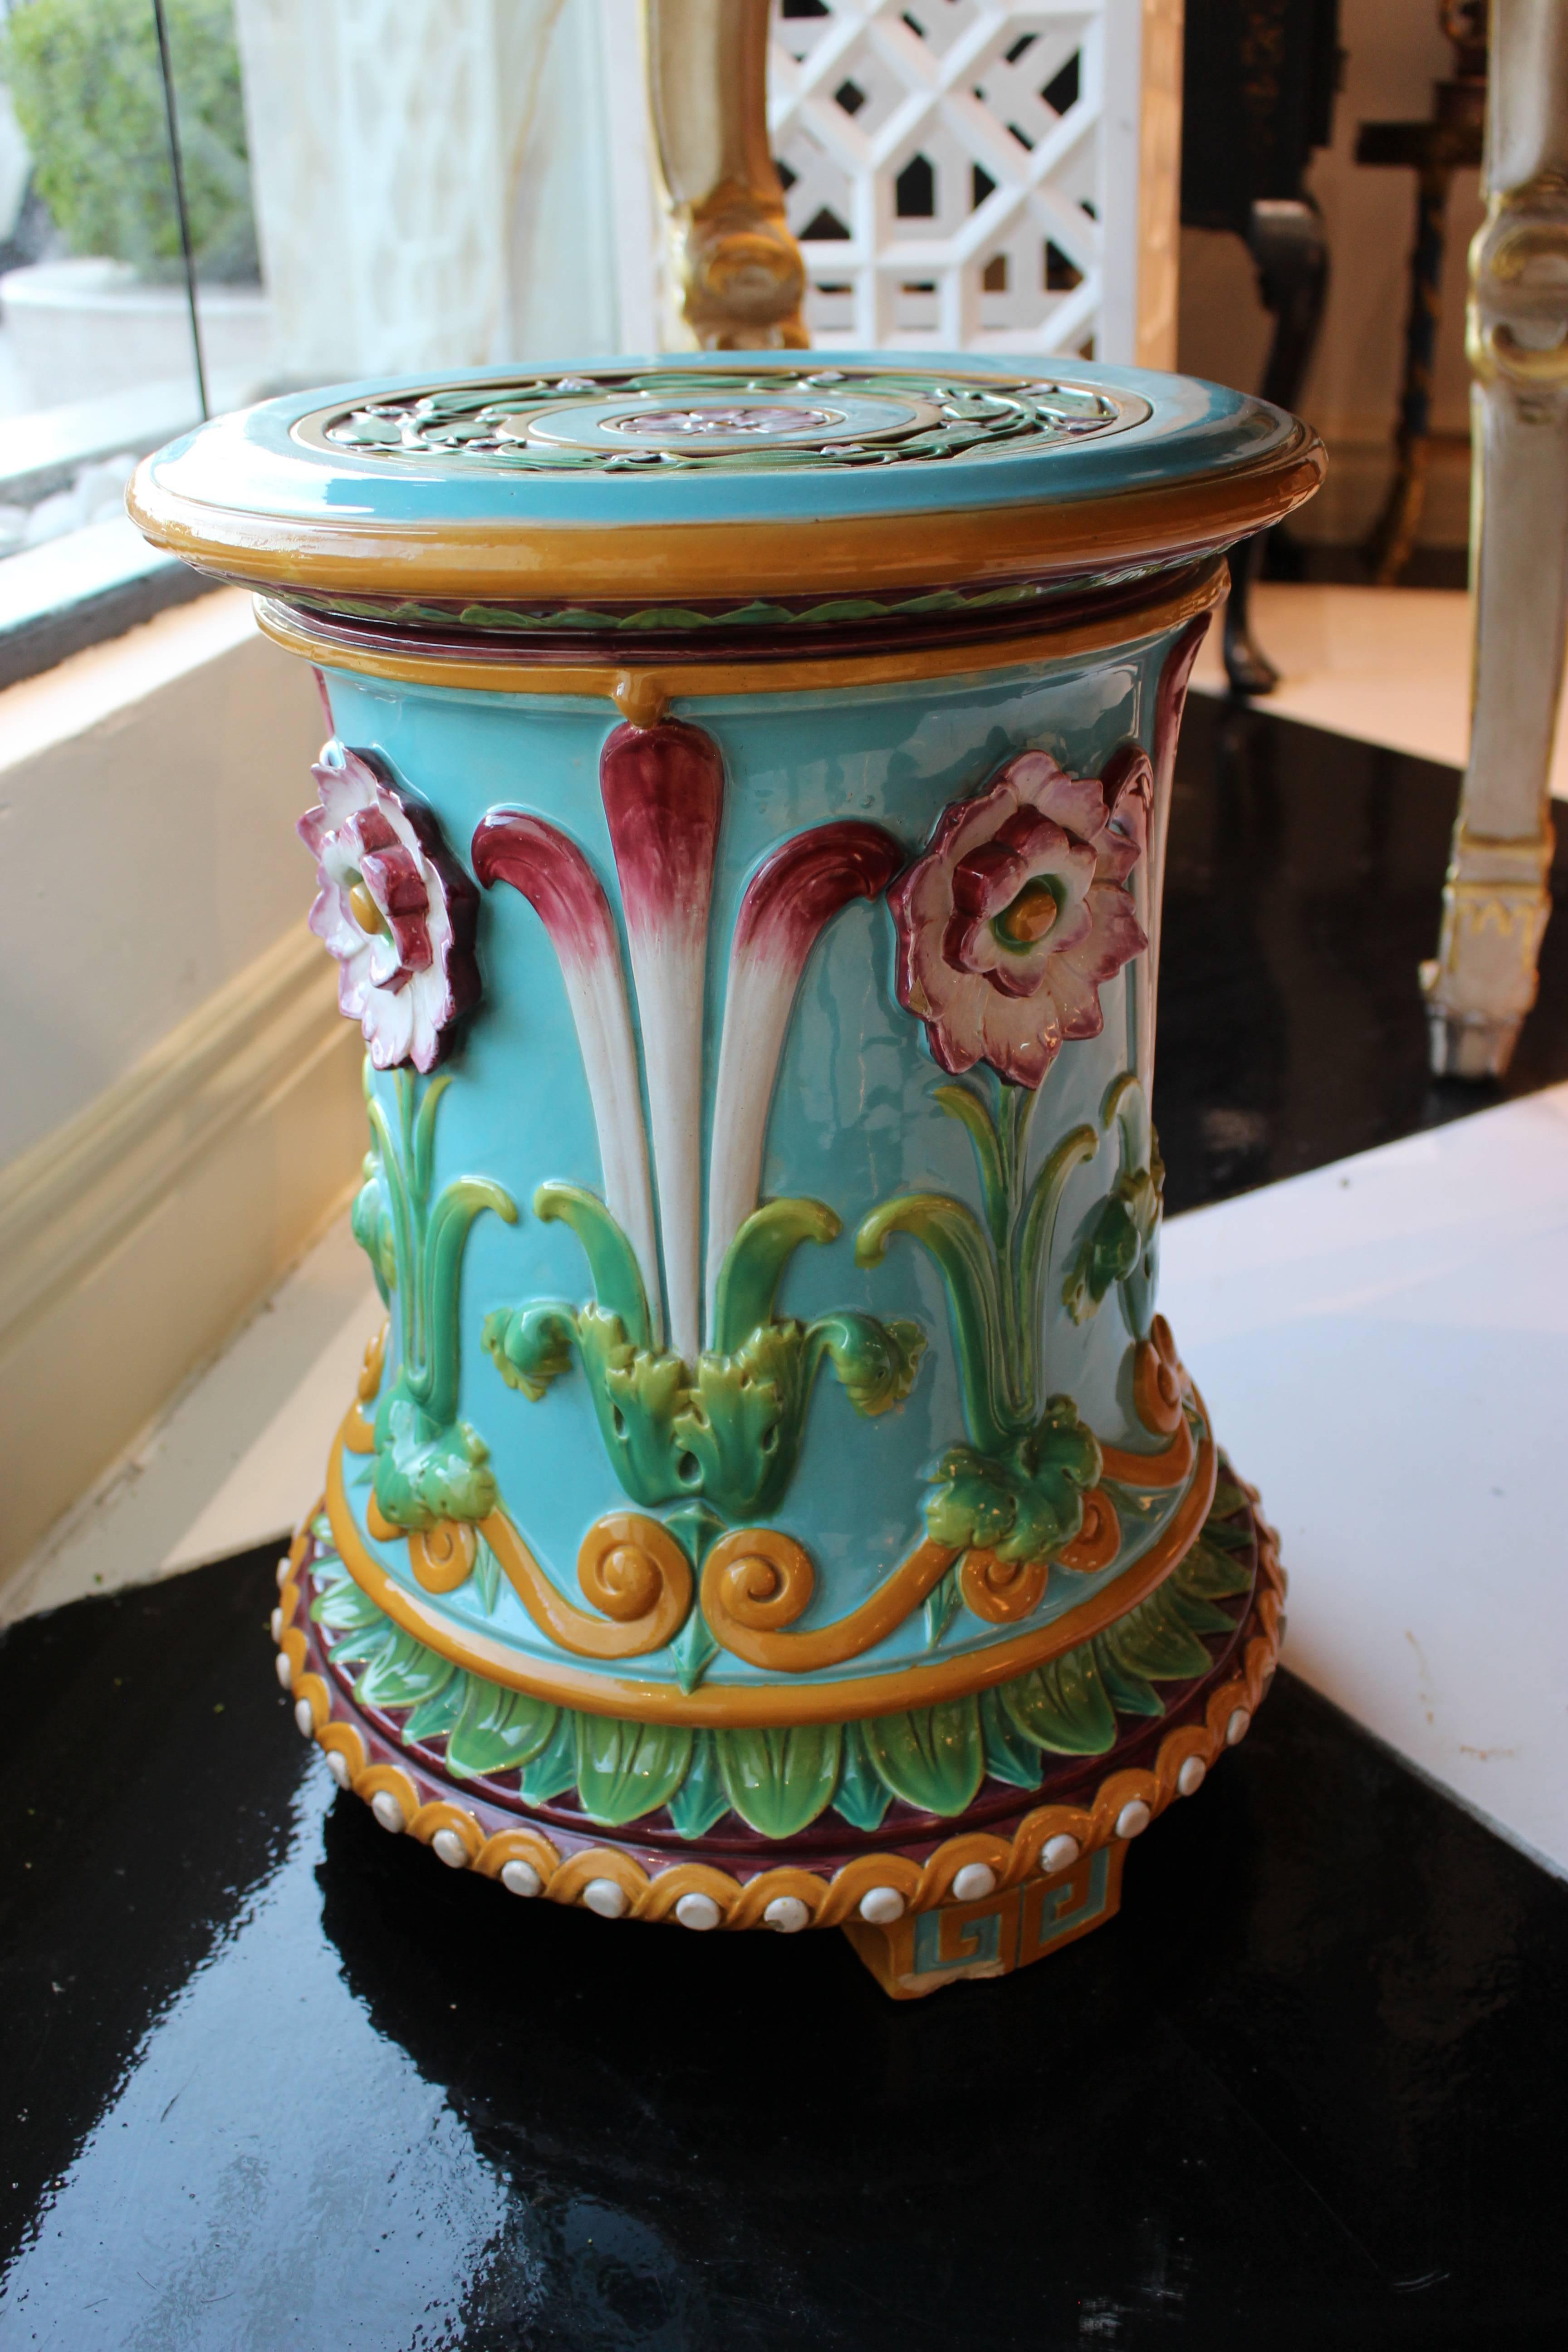 An English Minton Majolica 1876 garden seat of waisted cylindrical form moulded in high relief with cheerful colors. Pink-edged passion flowers and palmettes alternate on a cheerful turquoise ground contrasting with an orange scrolling border over